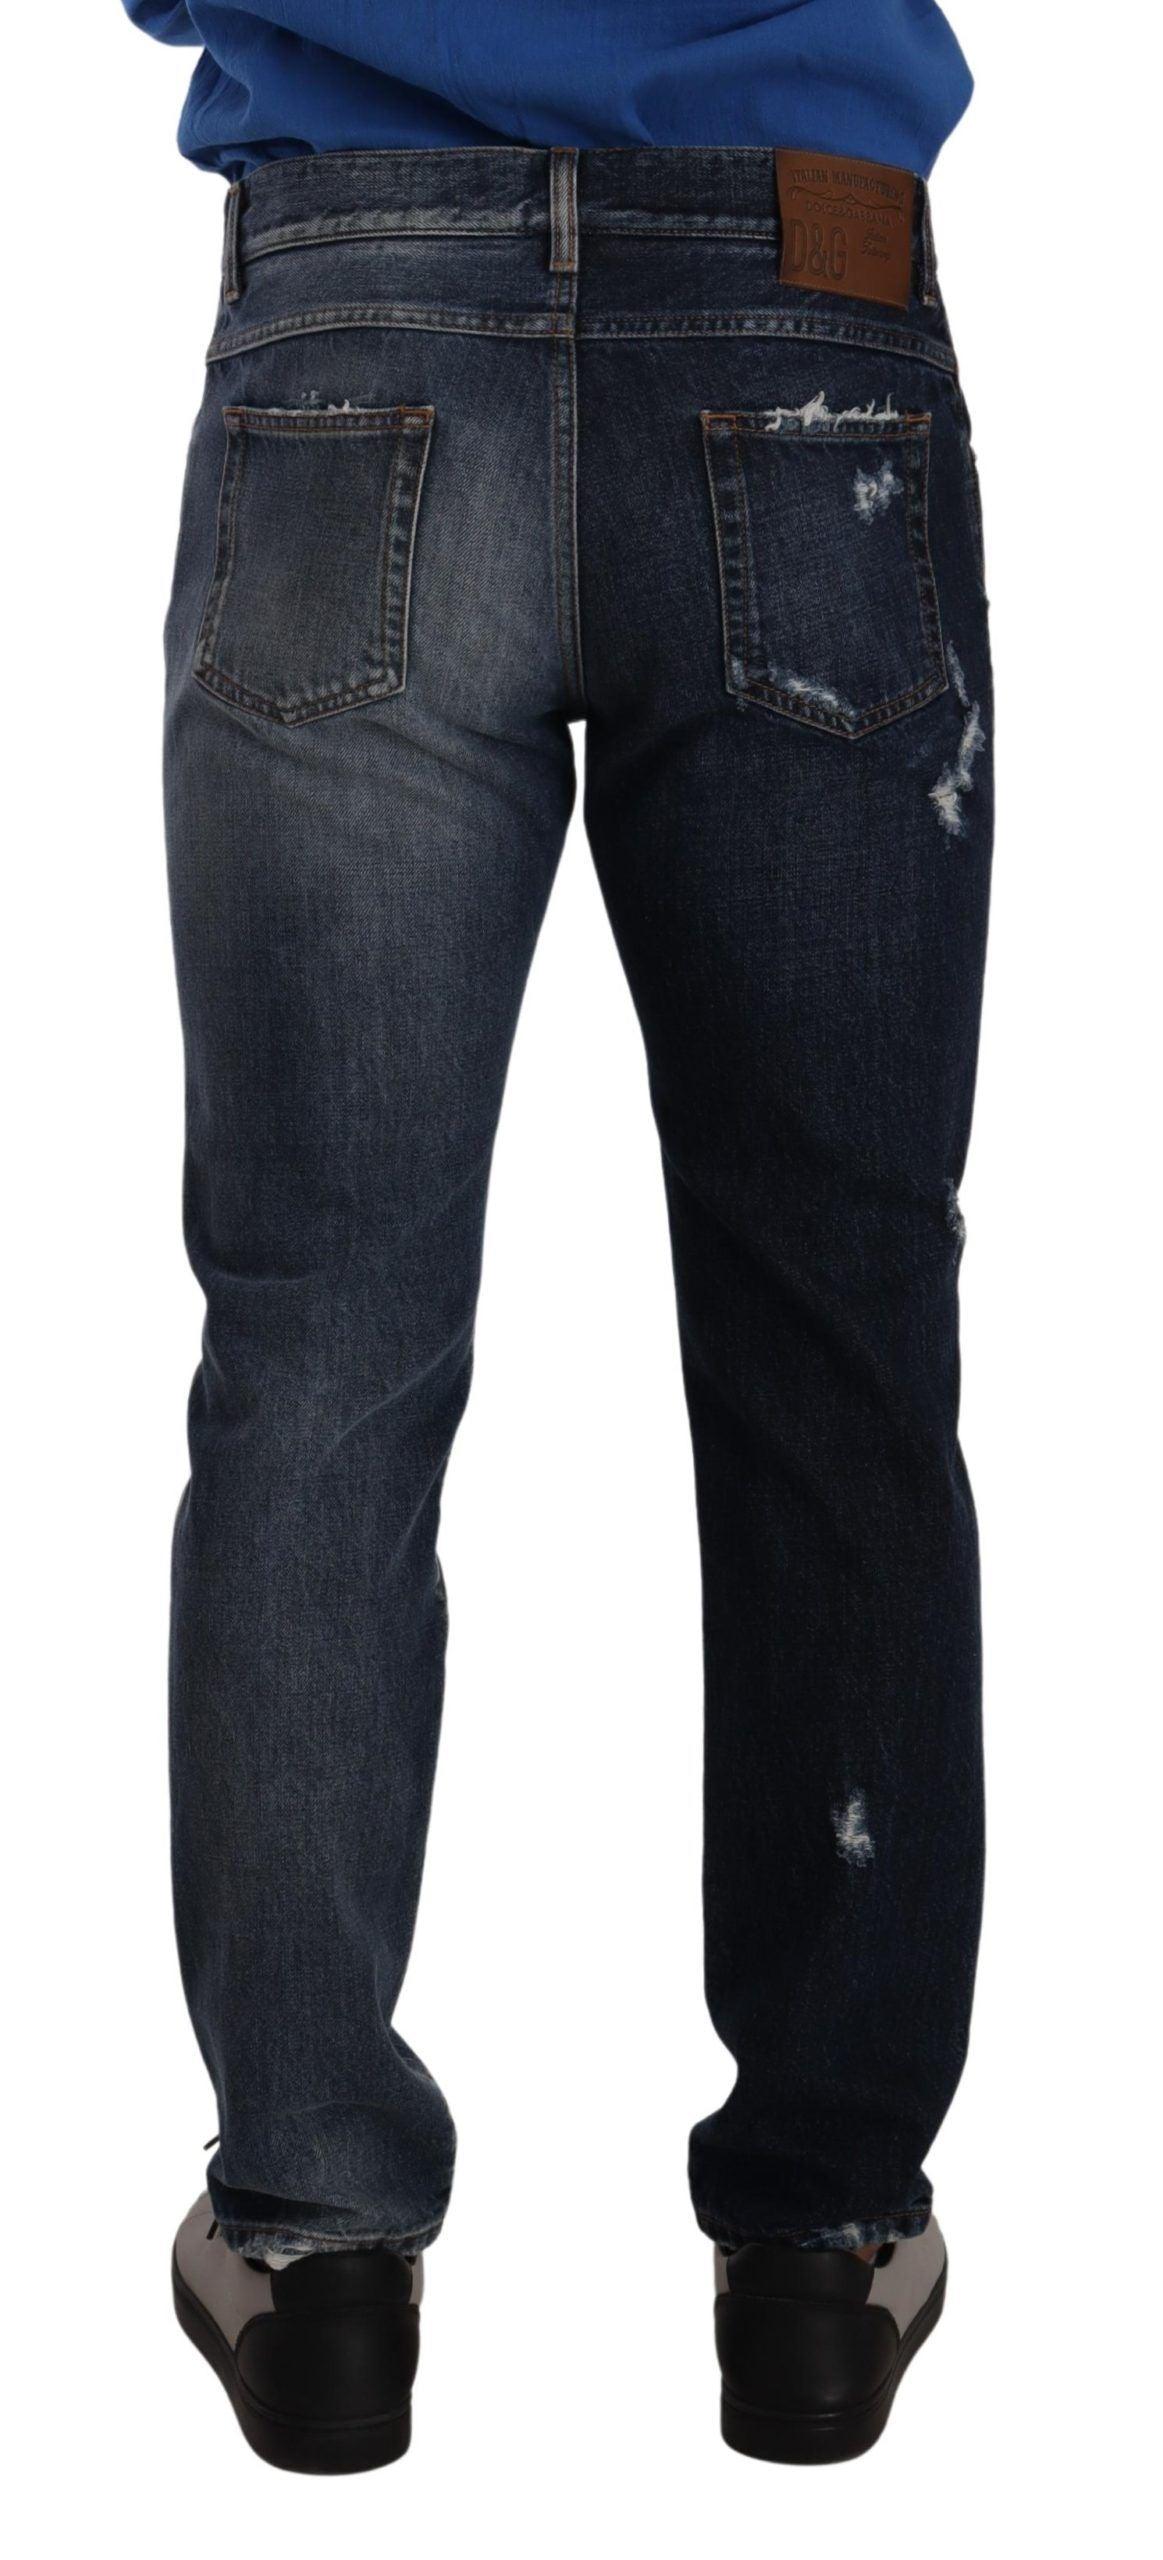 Blue Cotton Regular Denim Trousers Jeans - Designed by Dolce & Gabbana Available to Buy at a Discounted Price on Moon Behind The Hill Online Designer Discount Store